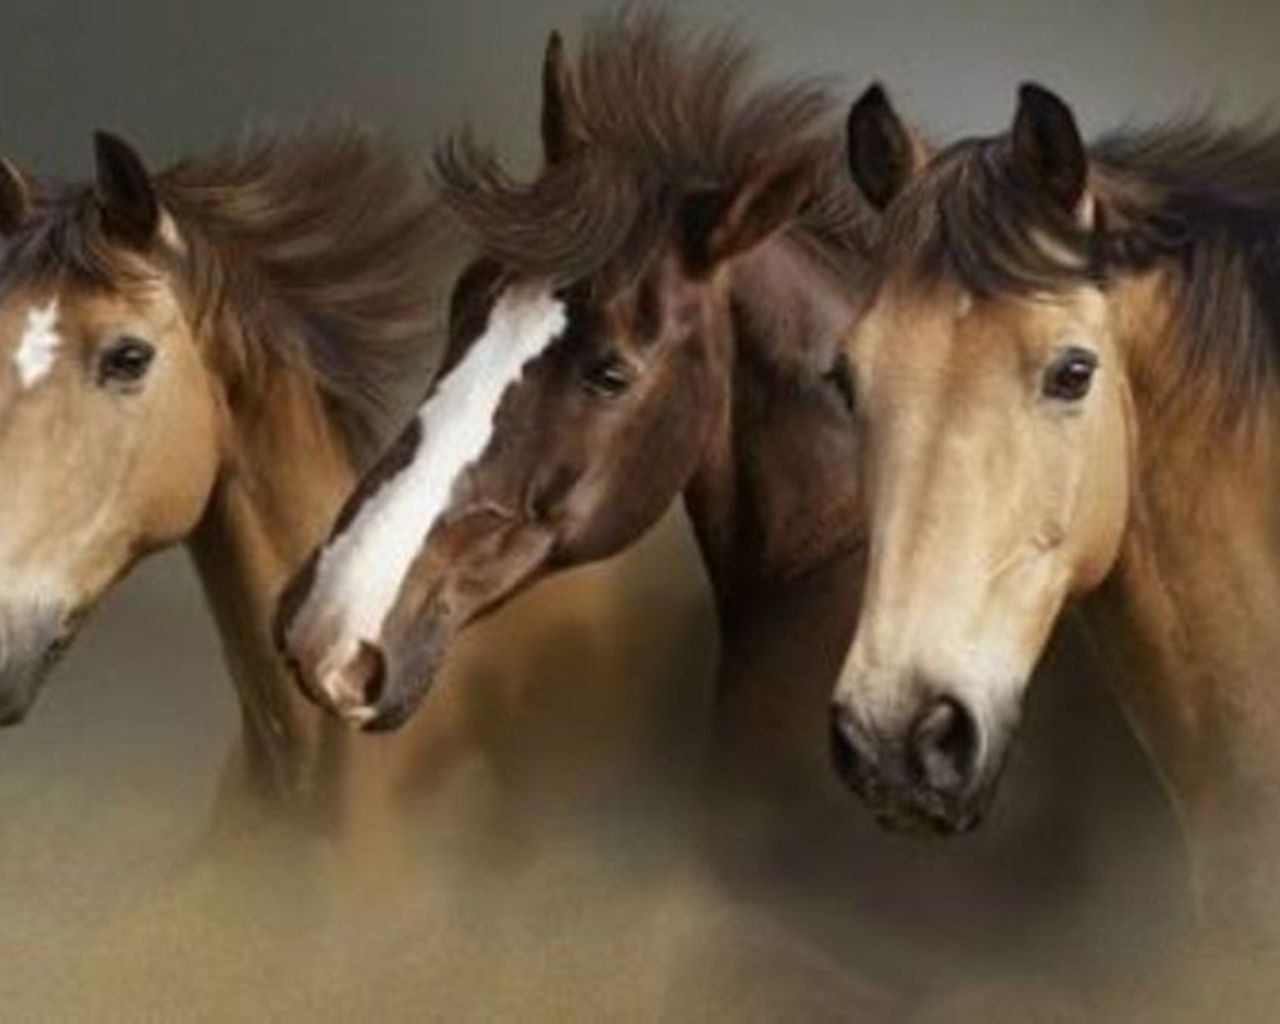 Beauity Of The Wild Horse Wallpaper. Howling For Justice